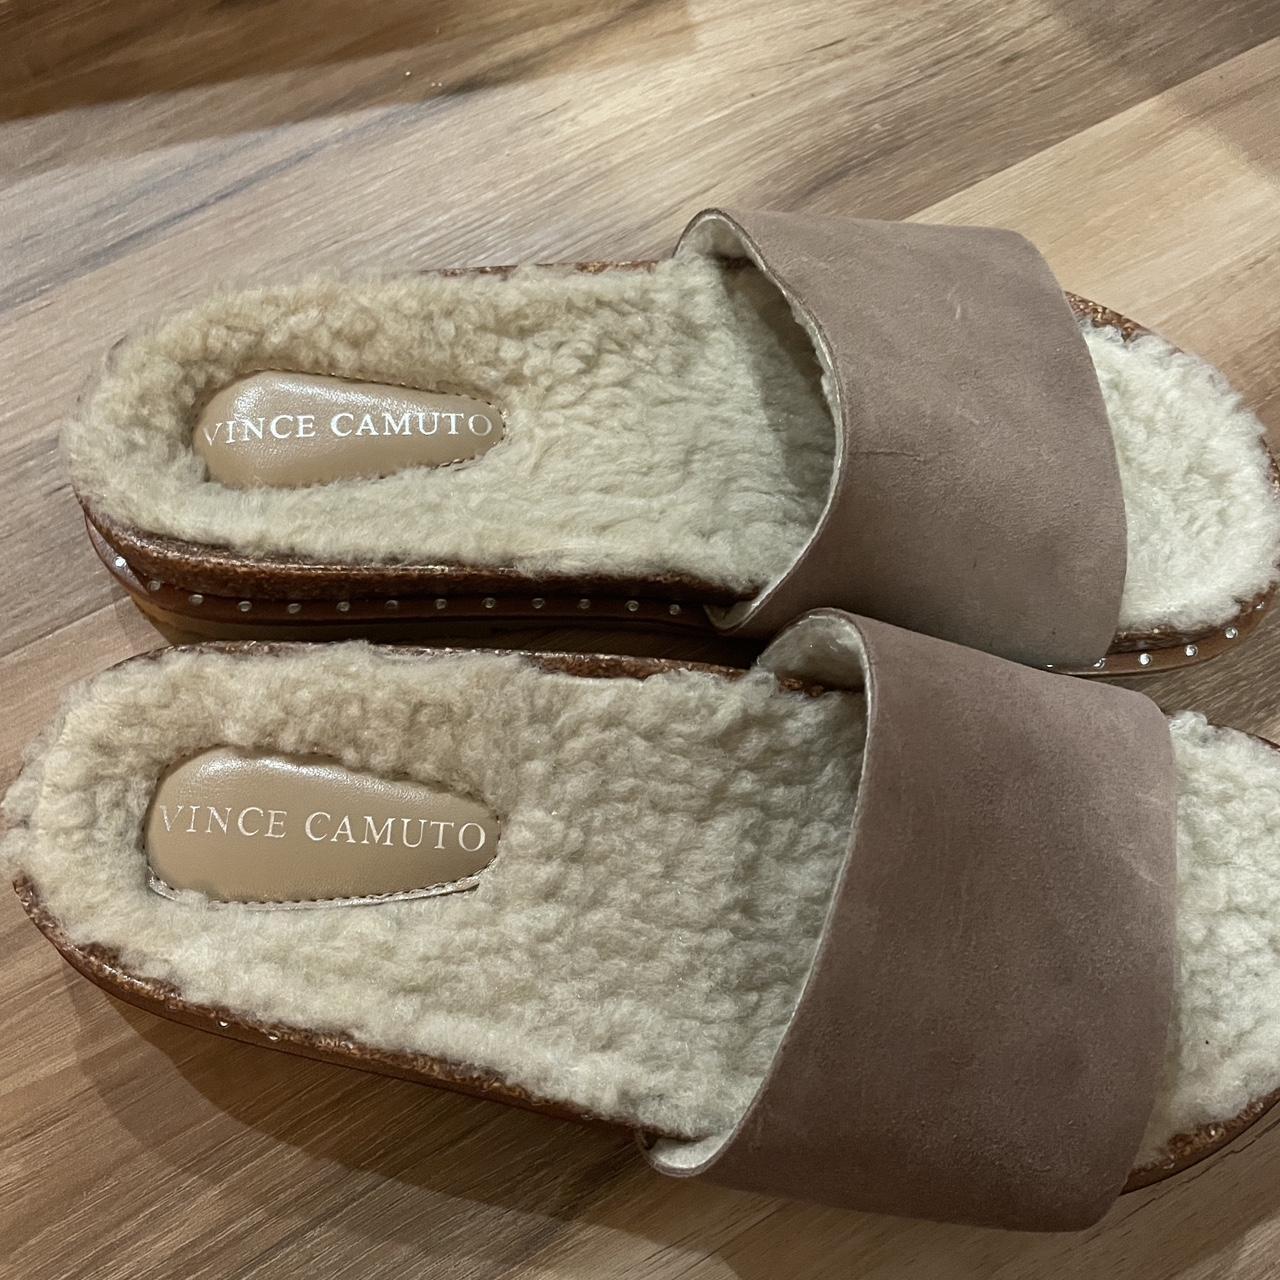 Vince Camuto Women's Tan and Cream Slides (2)